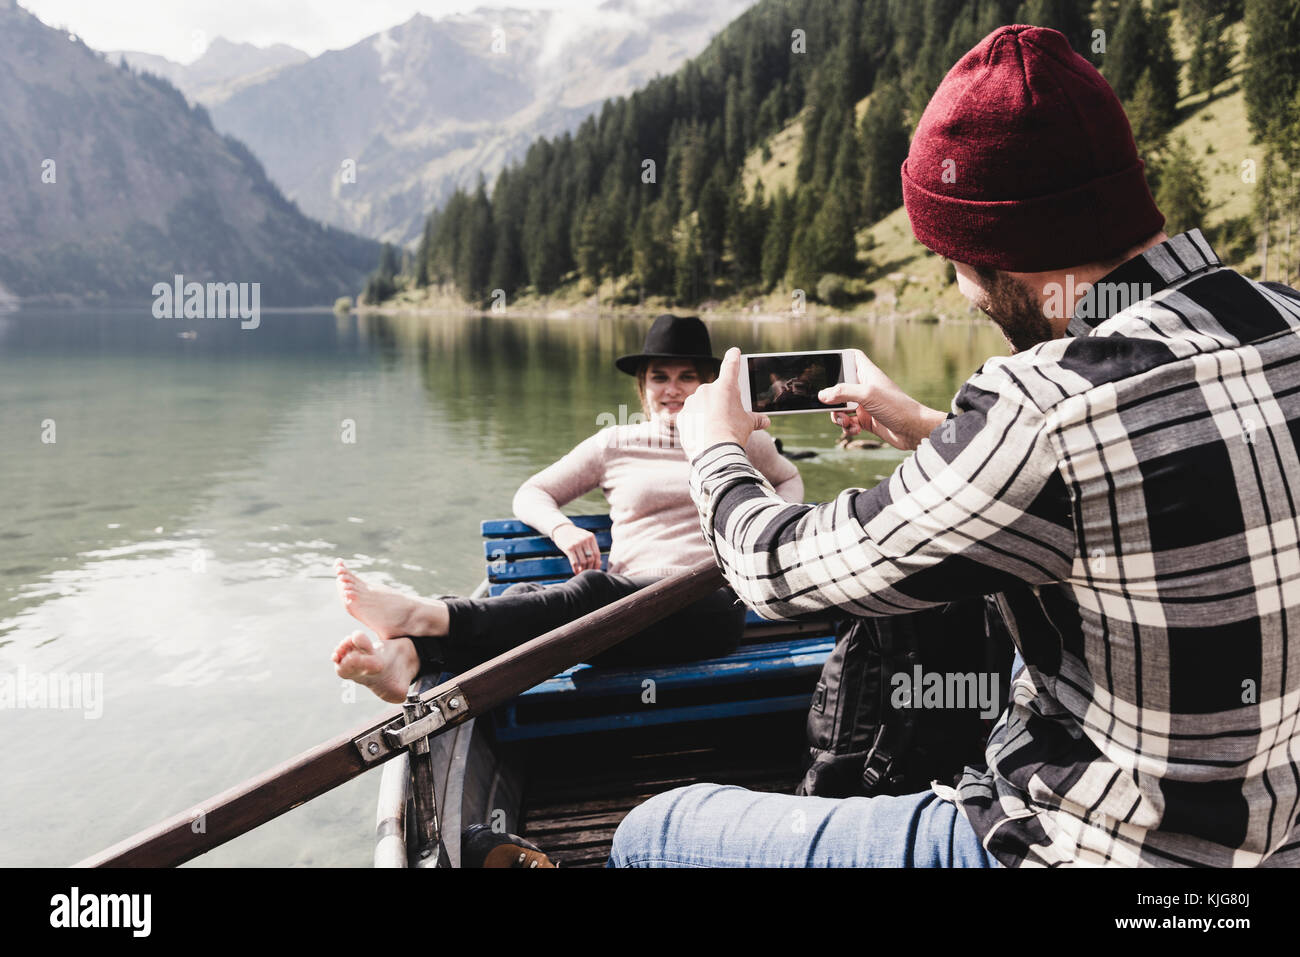 Austria, Tyrol, Alps, man taking cell phone picture of woman in rowing boat on mountain lake Stock Photo